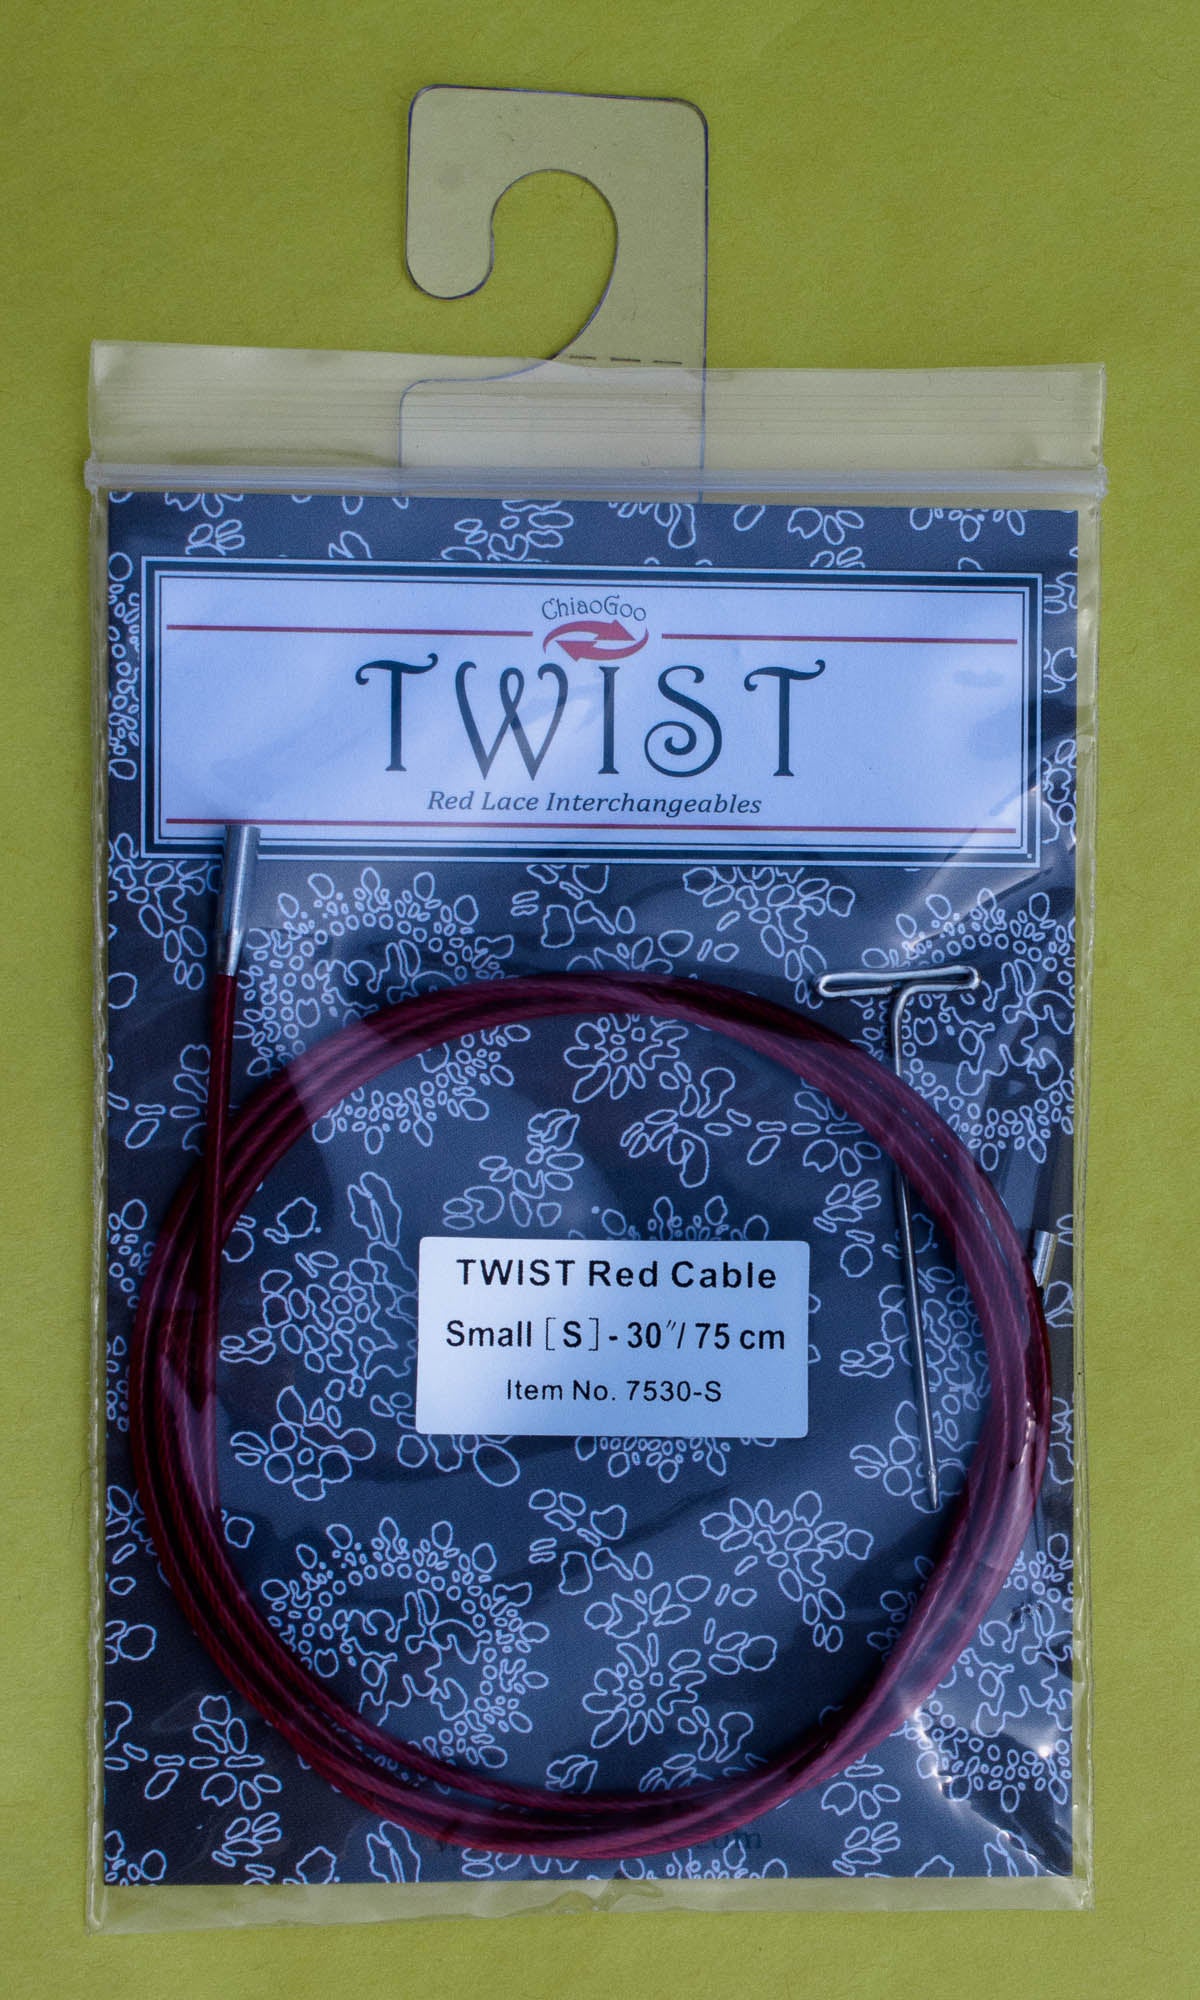 ChiaoGoo Twist Red Lace Interchangeable Cables 22 inch-Mini